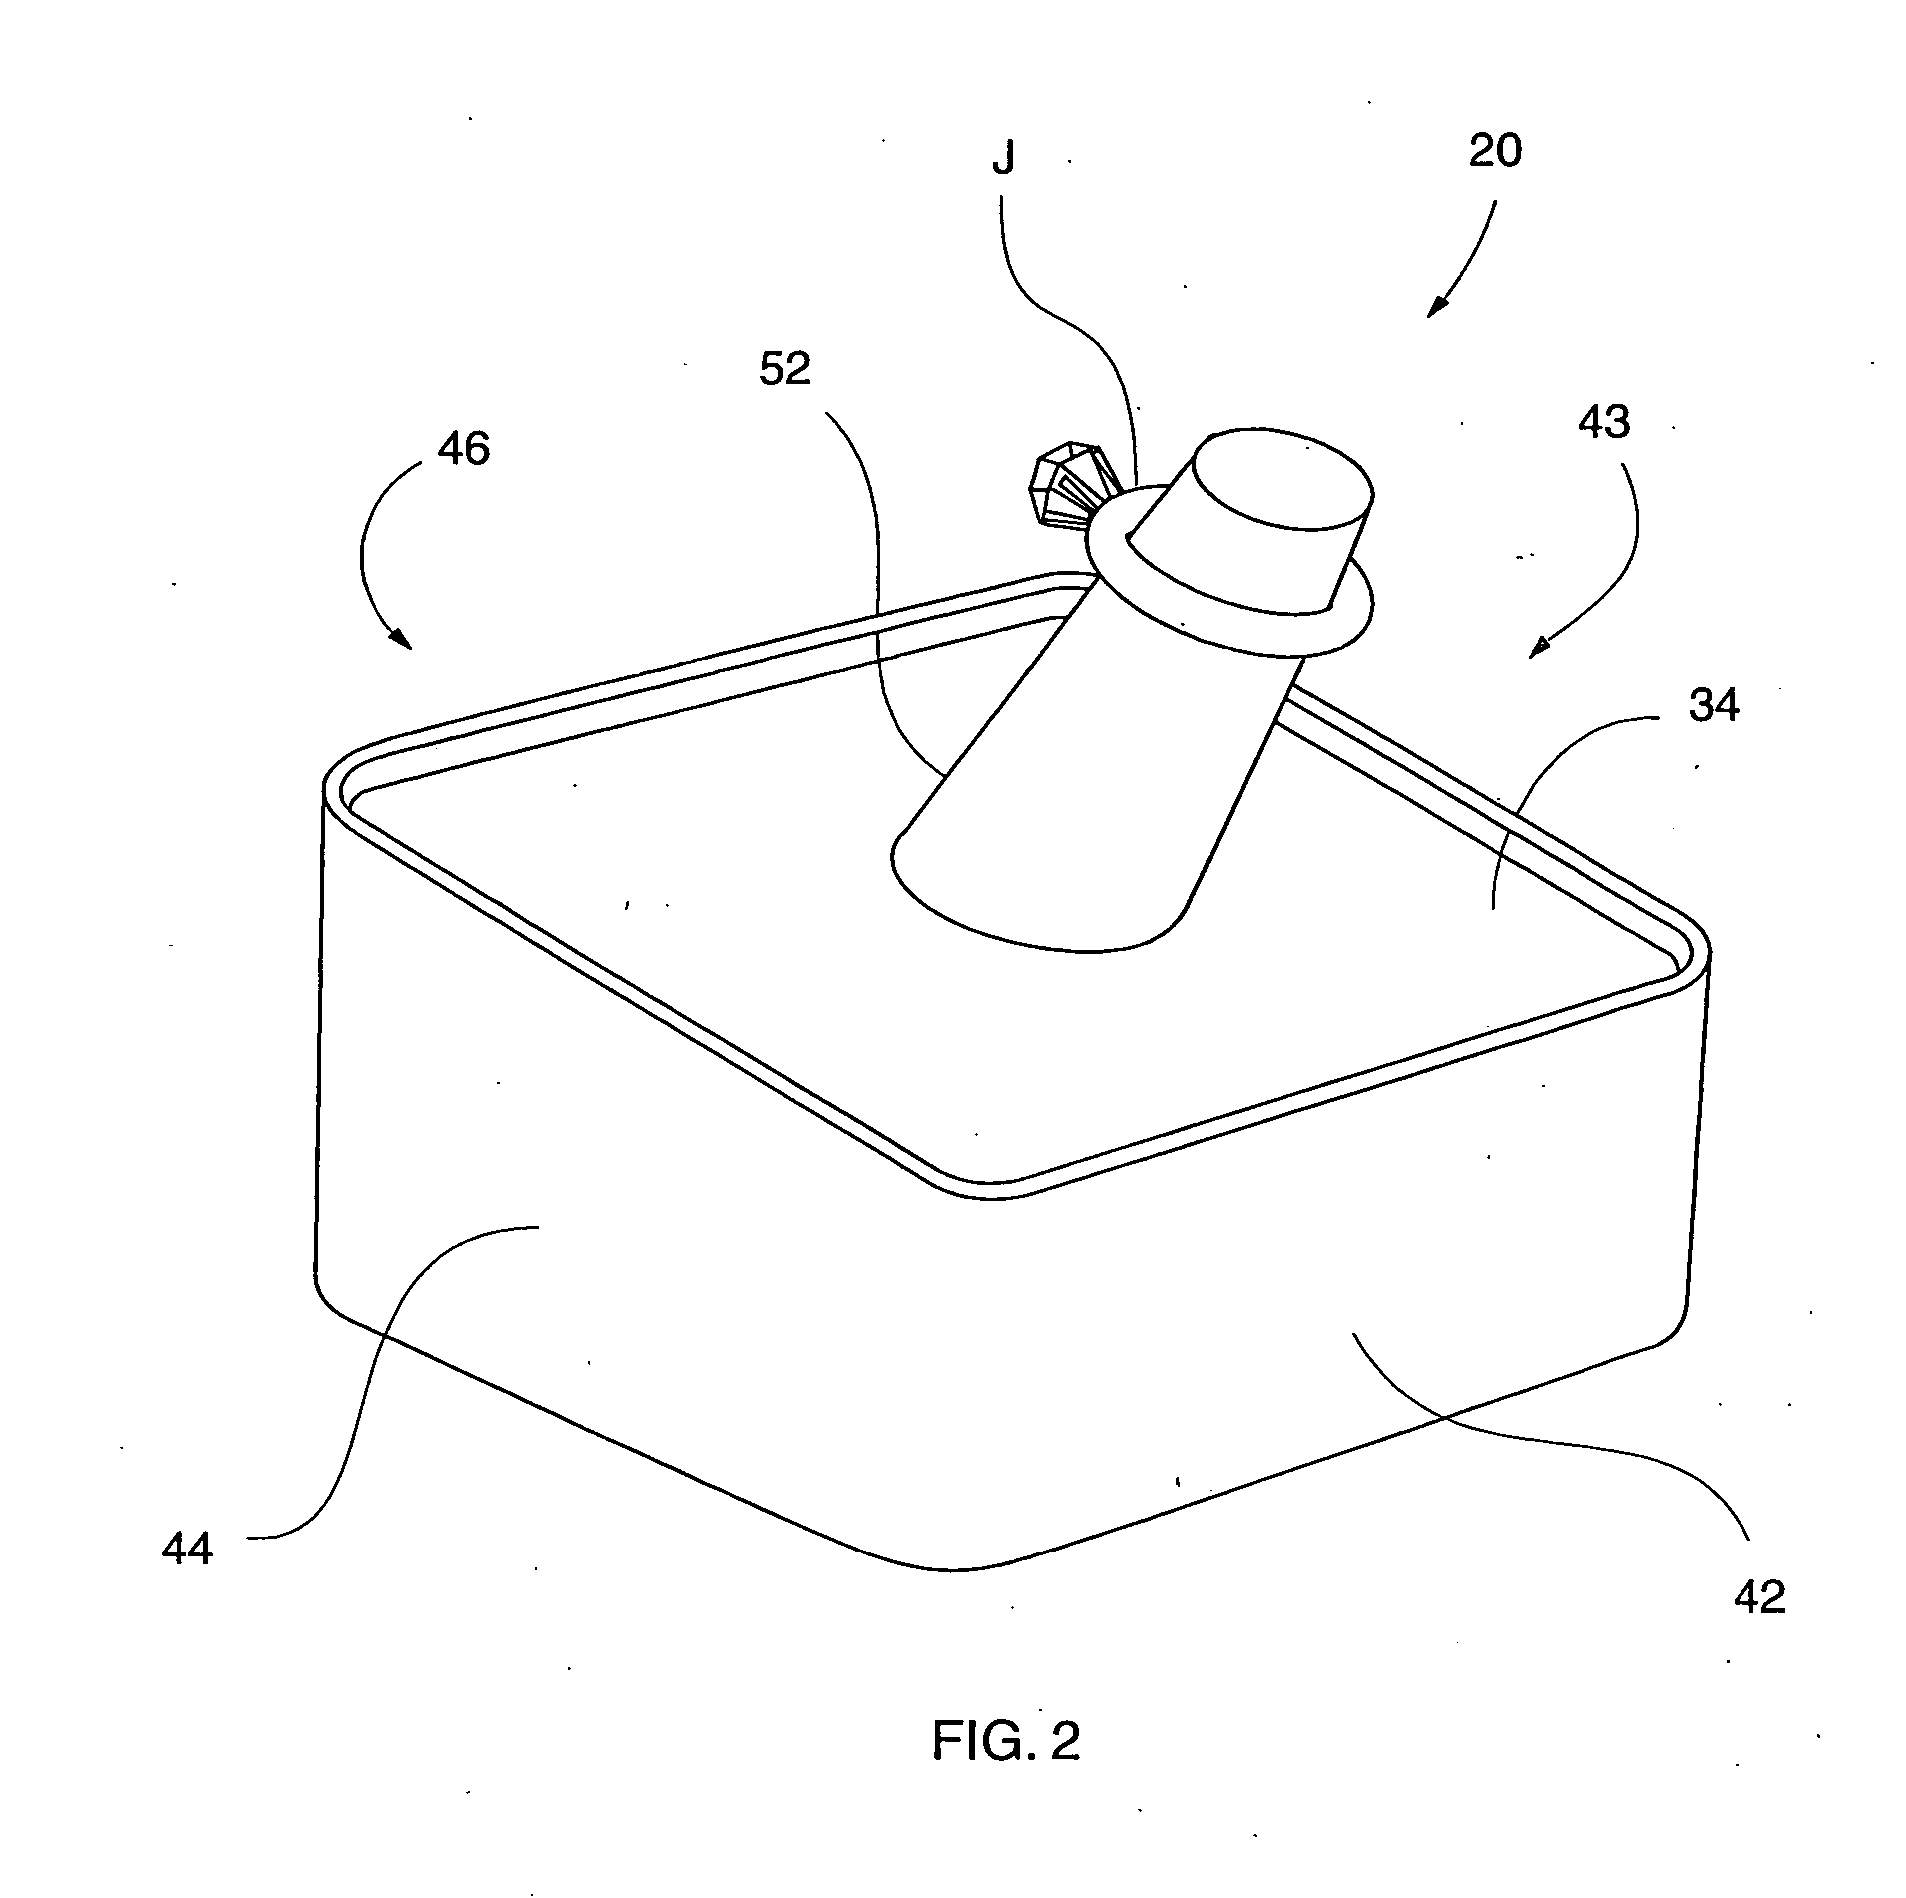 Article display and method of use thereof